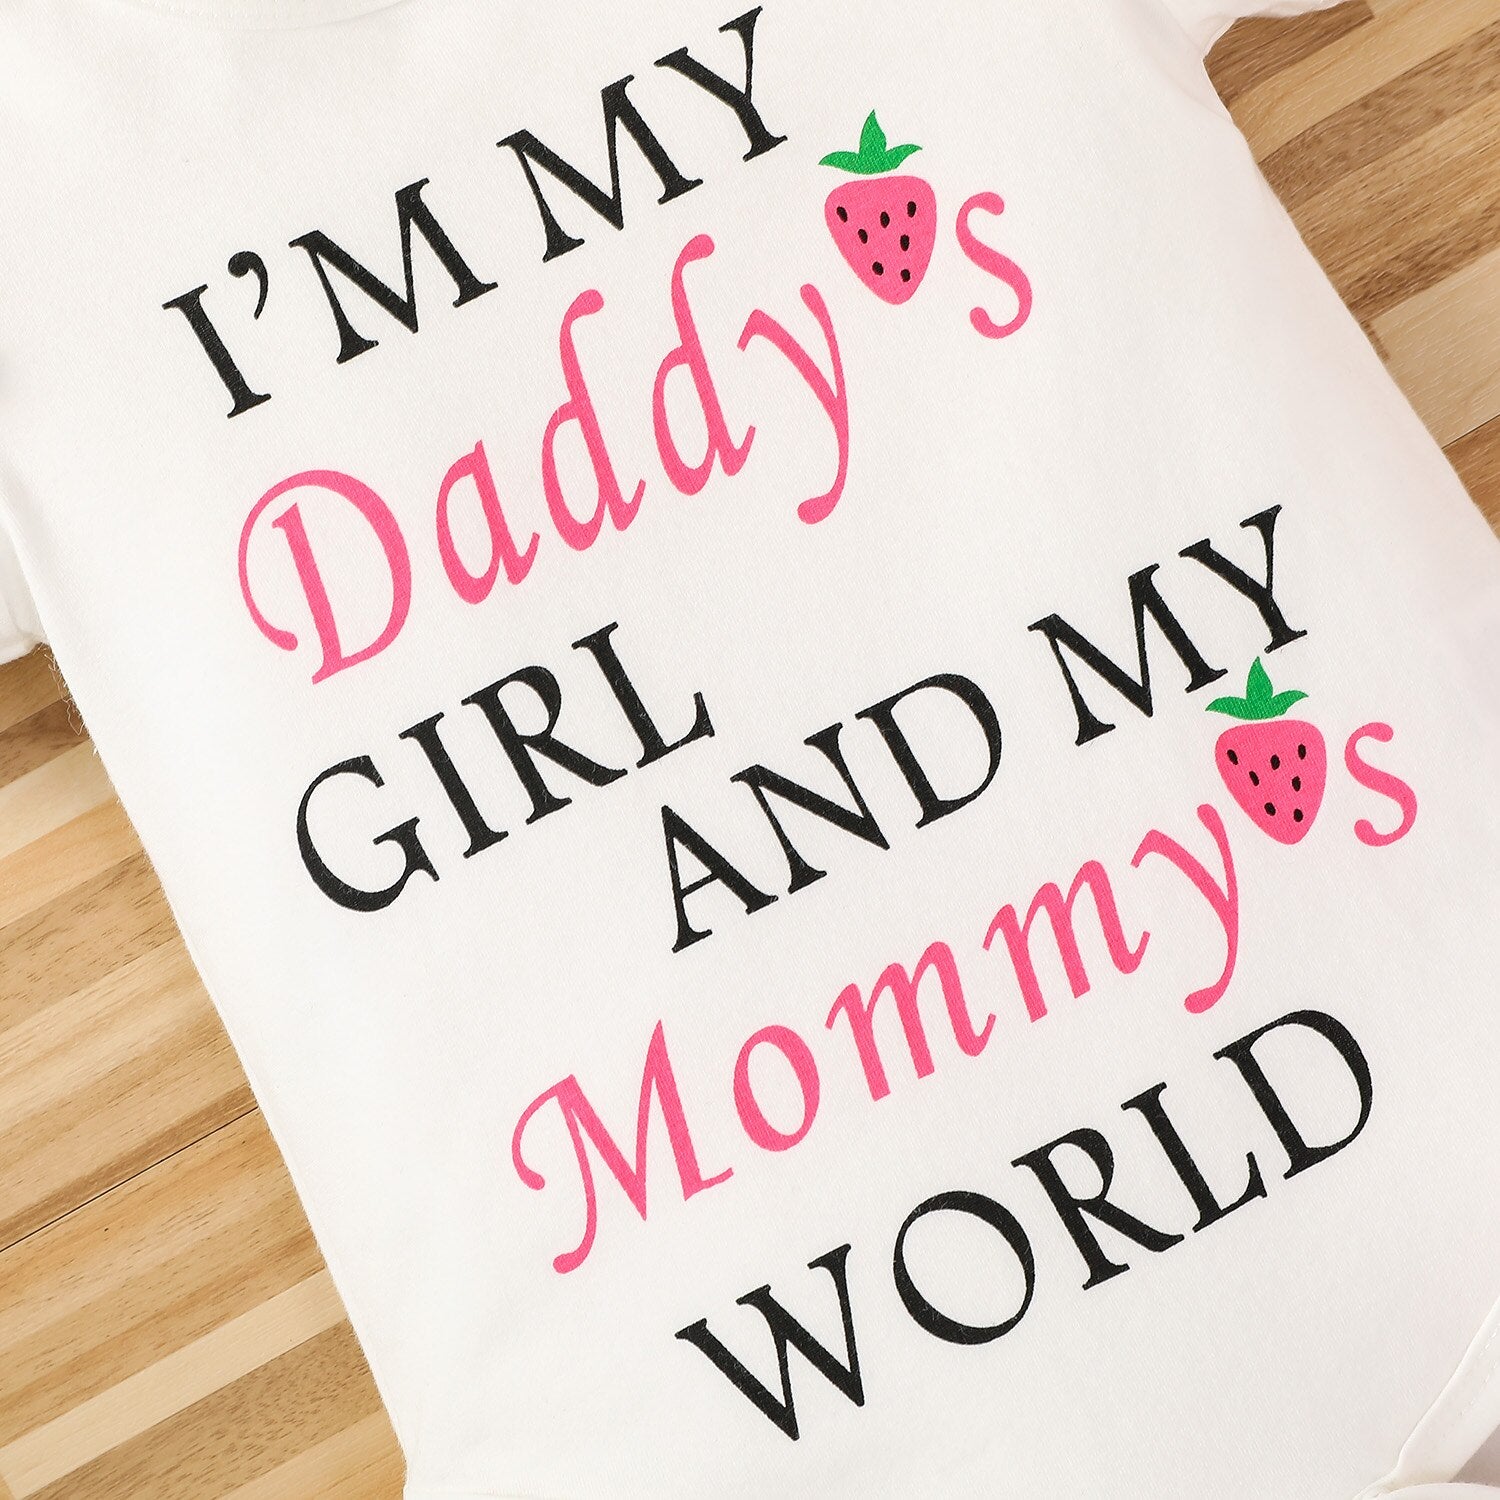 Baby Girl Letter Printed Romper | Baby Girl Suit | Smart Parents Store